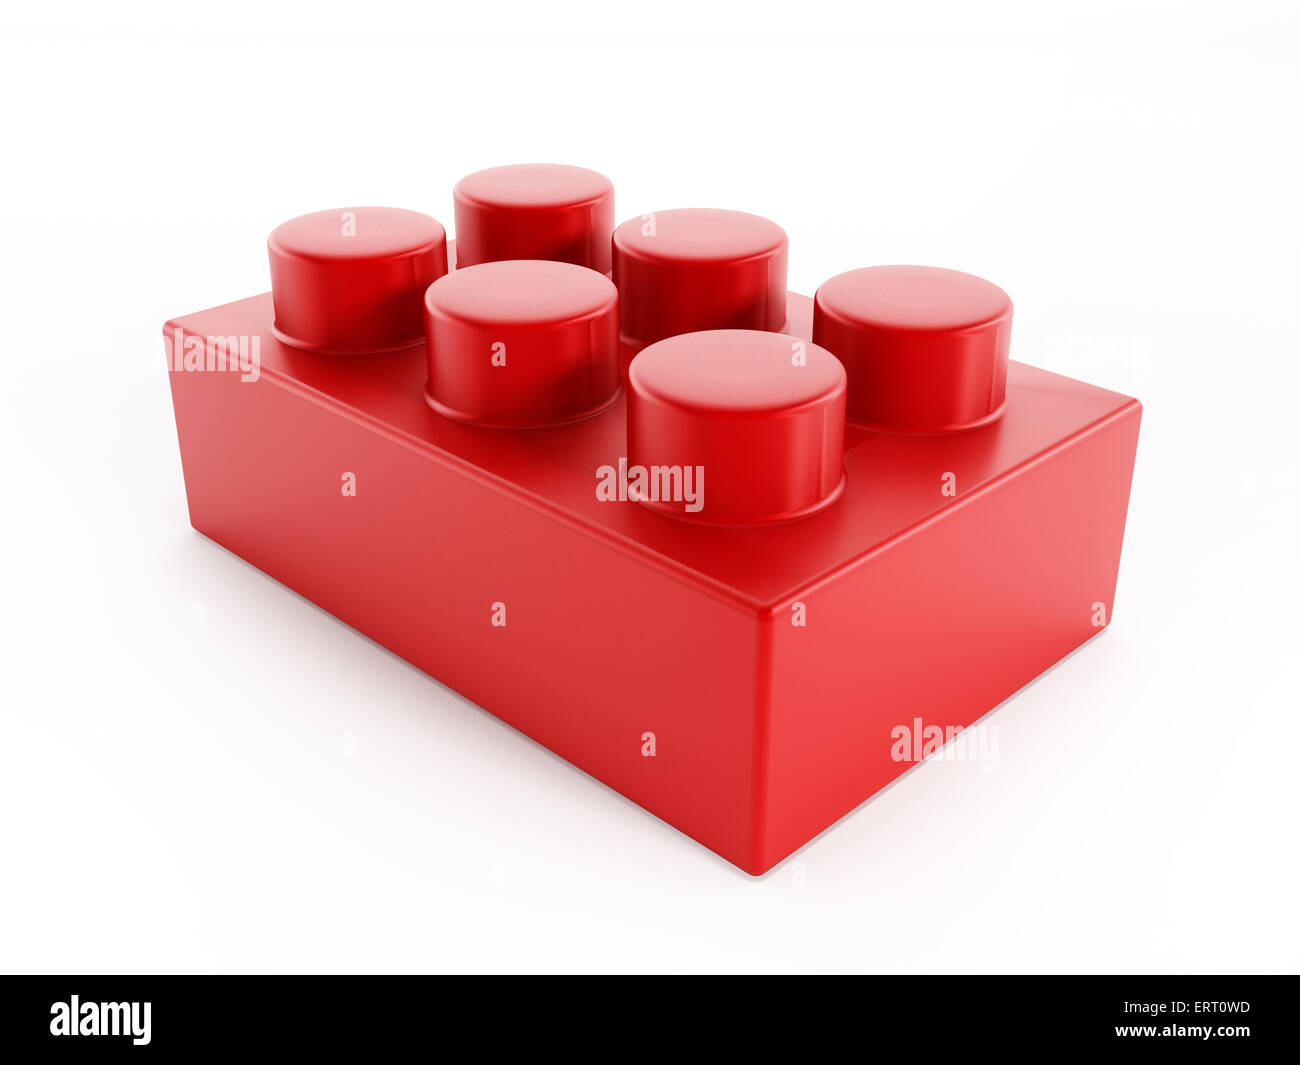 Red building block toy part isolated on white background Stock Photo